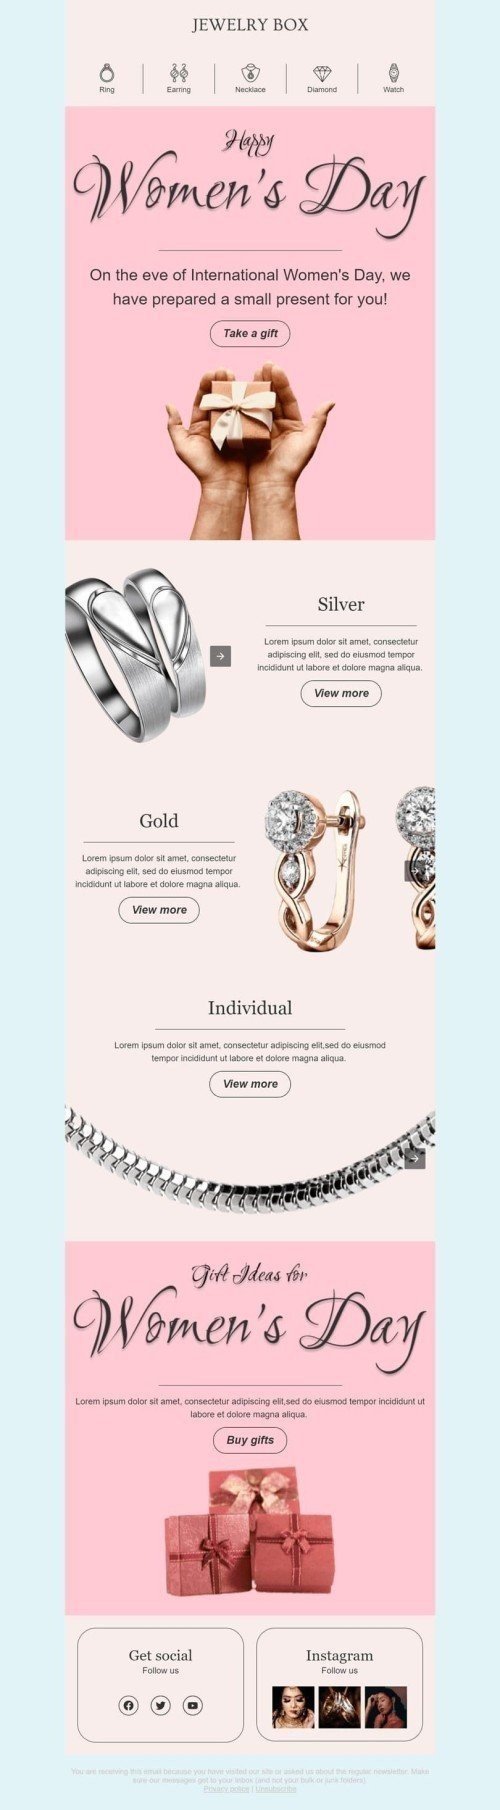 Women's Day Email Template "Jewelry box" for Jewelry industry mobile view